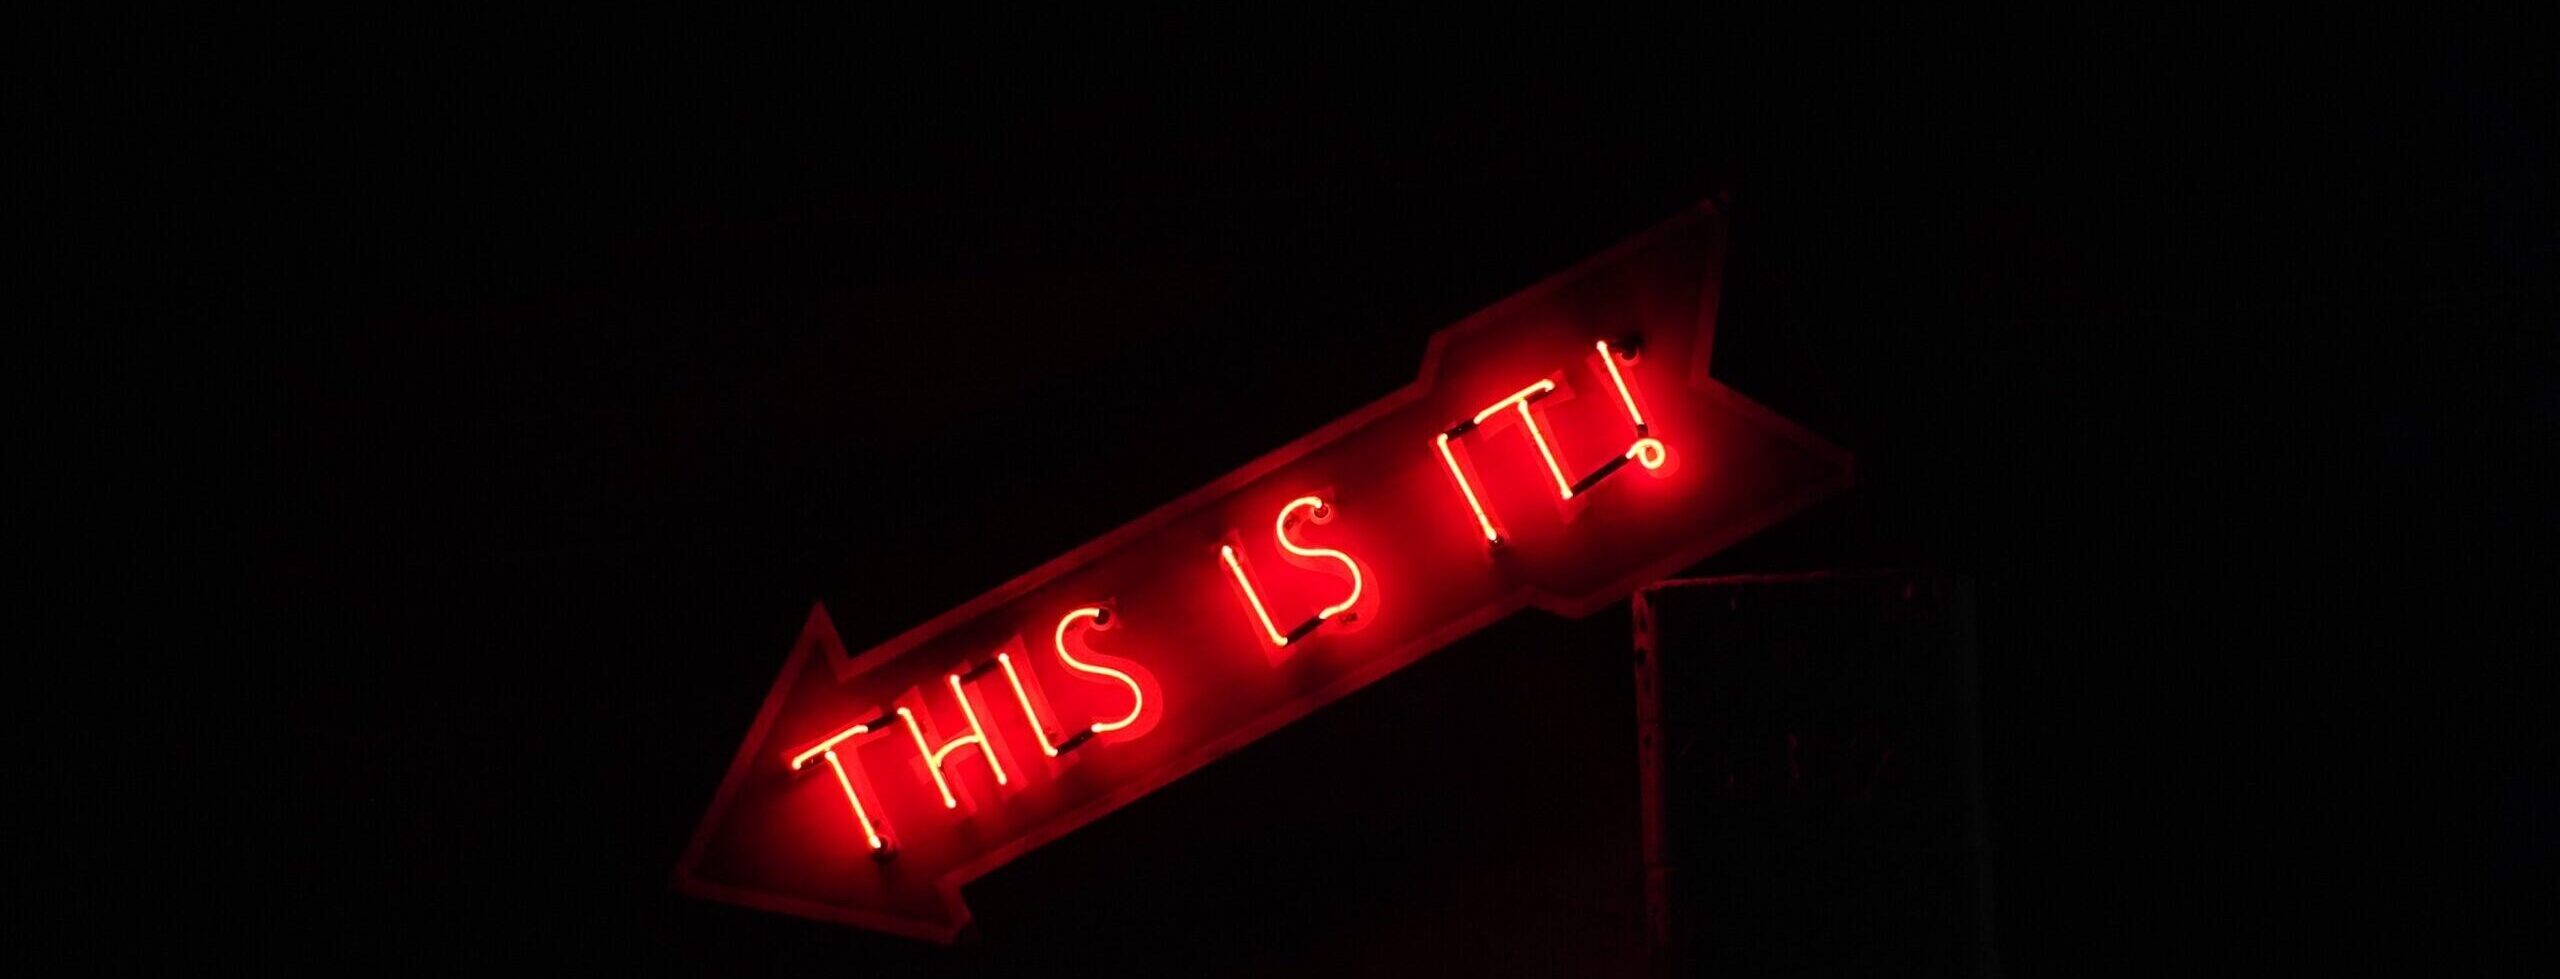 Neon sign reading 'This Is It!' - cropped - Rachel Writes email and e-newsletter writing service